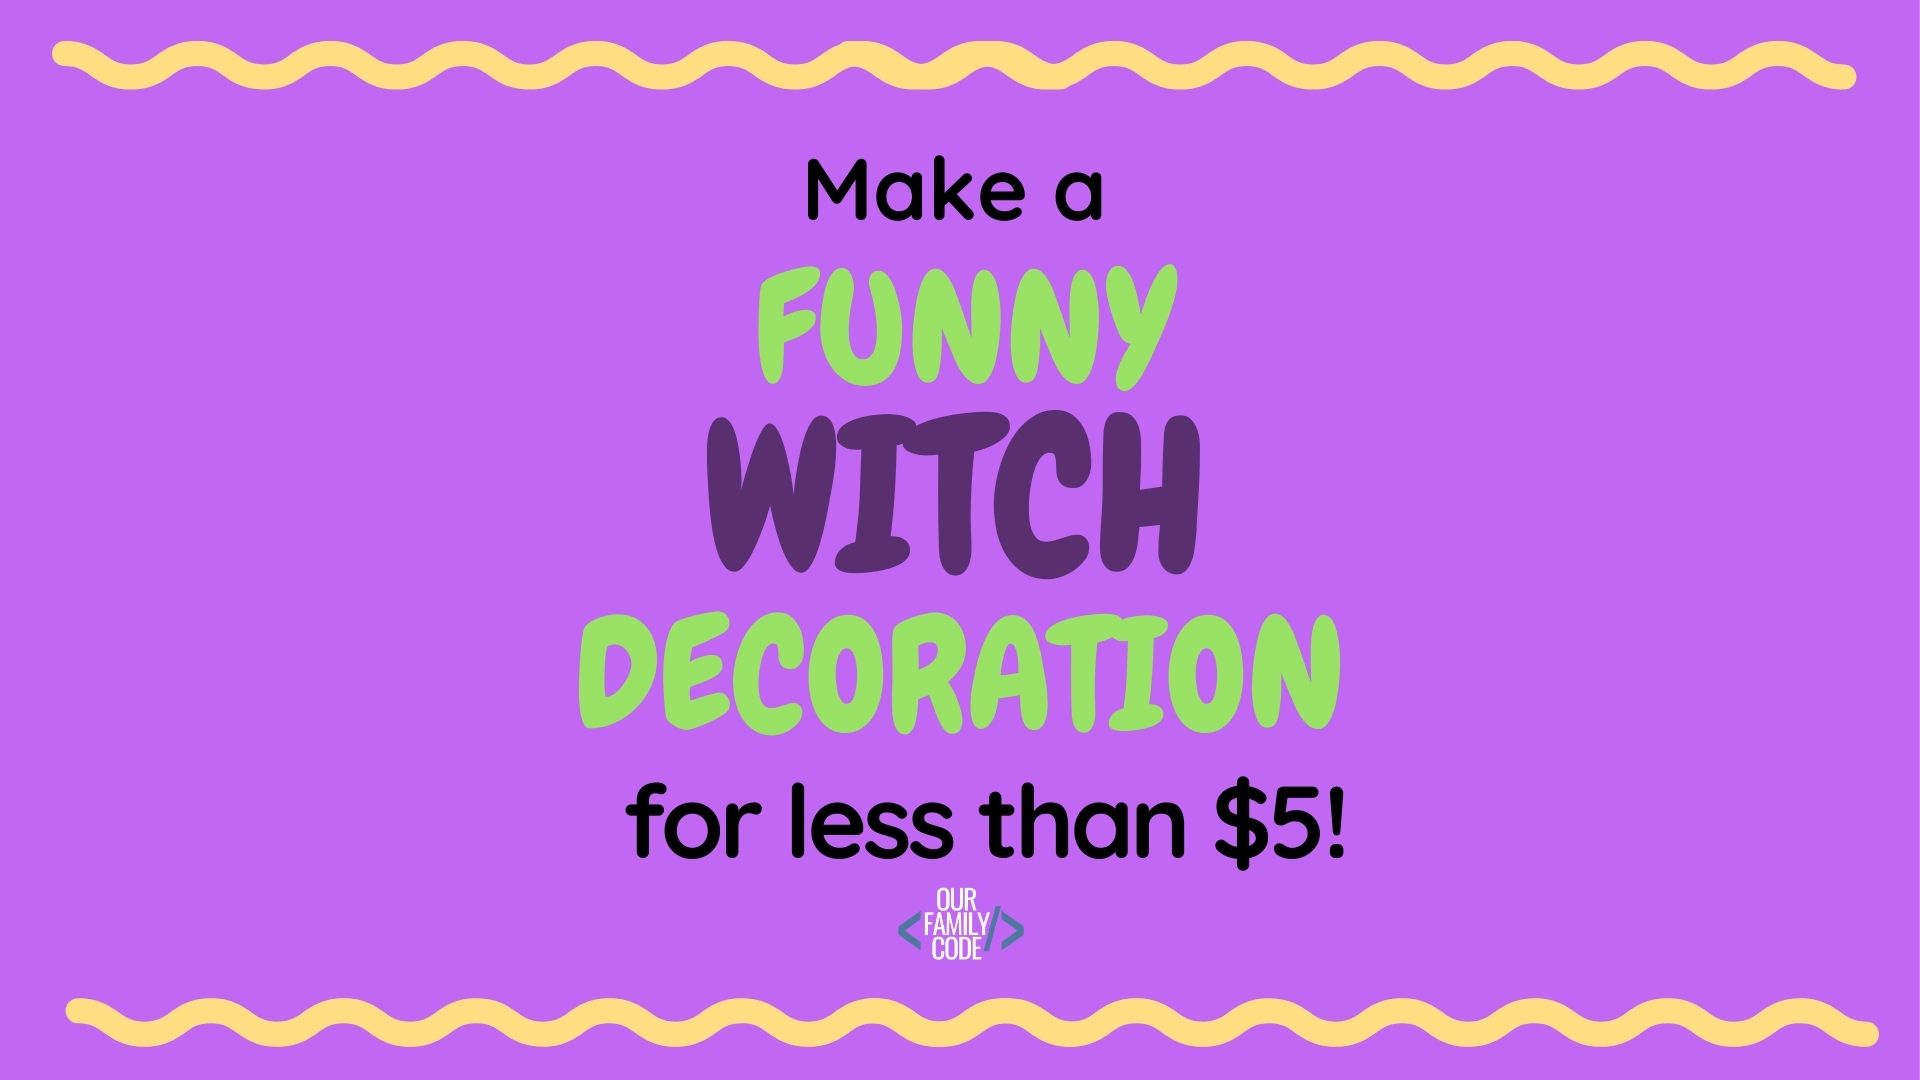 How to make a funny witch halloween decoration for less than $5